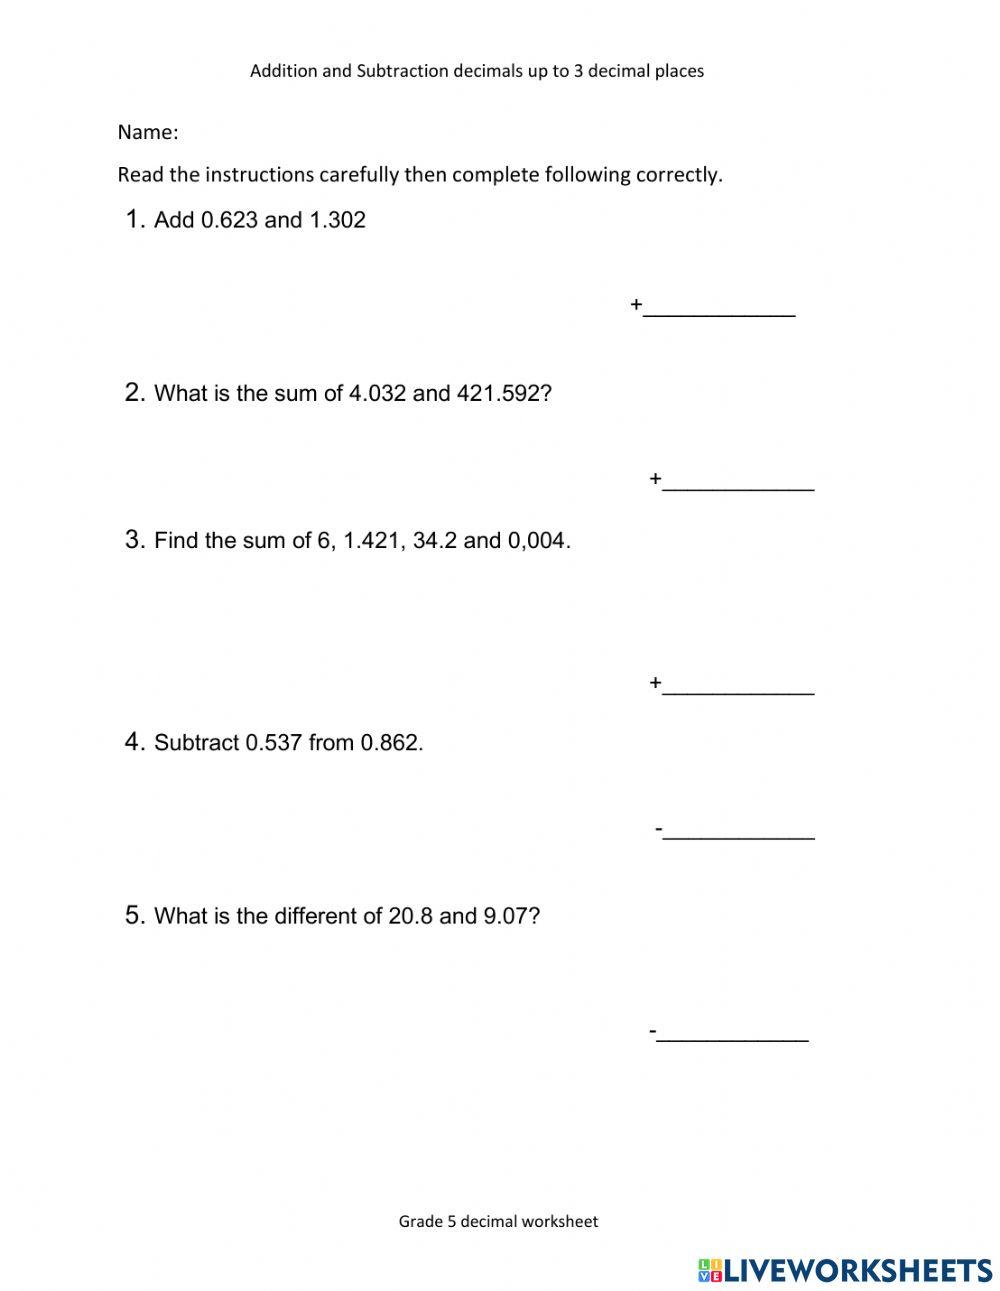 adding-and-subtracting-decimals-interactive-exercise-live-worksheets